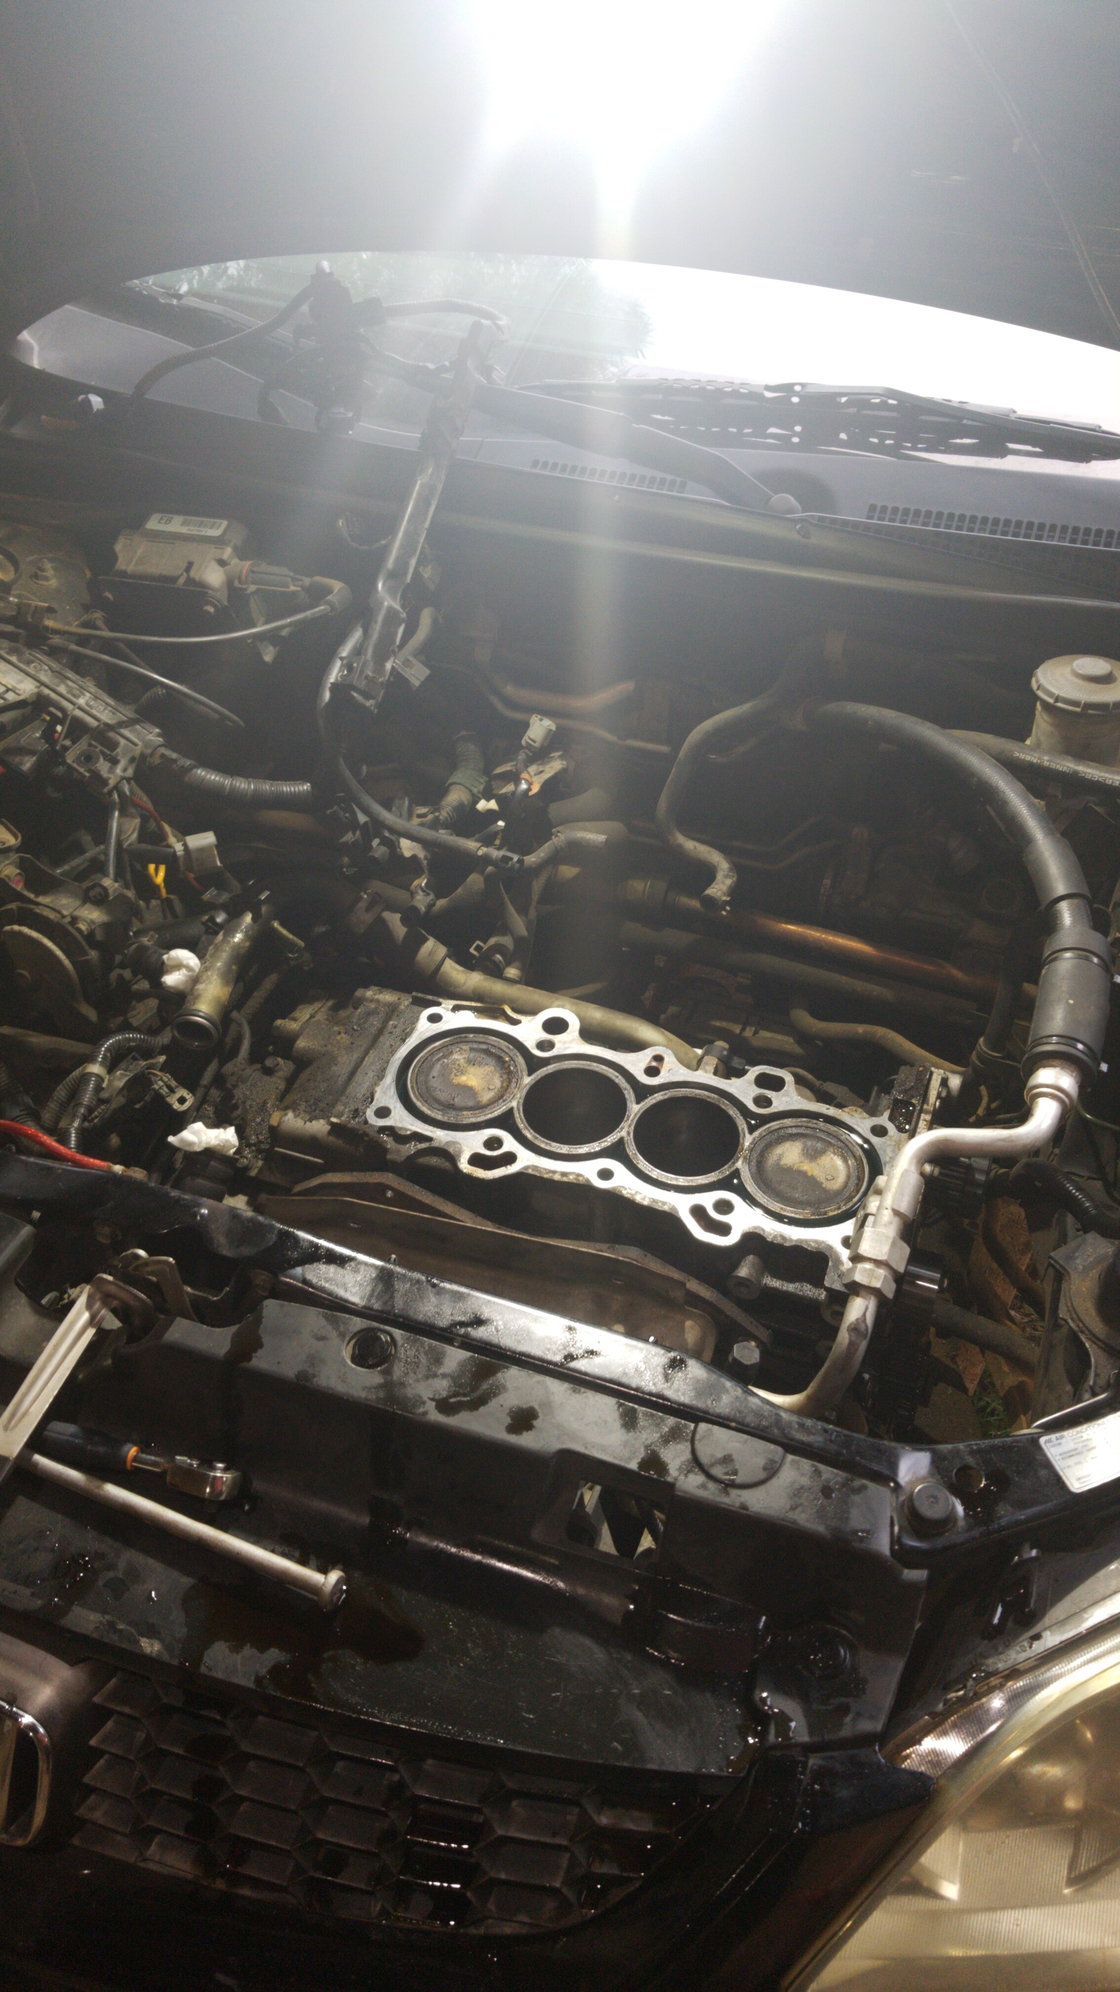 Replace Head Gasket or Trade-In?